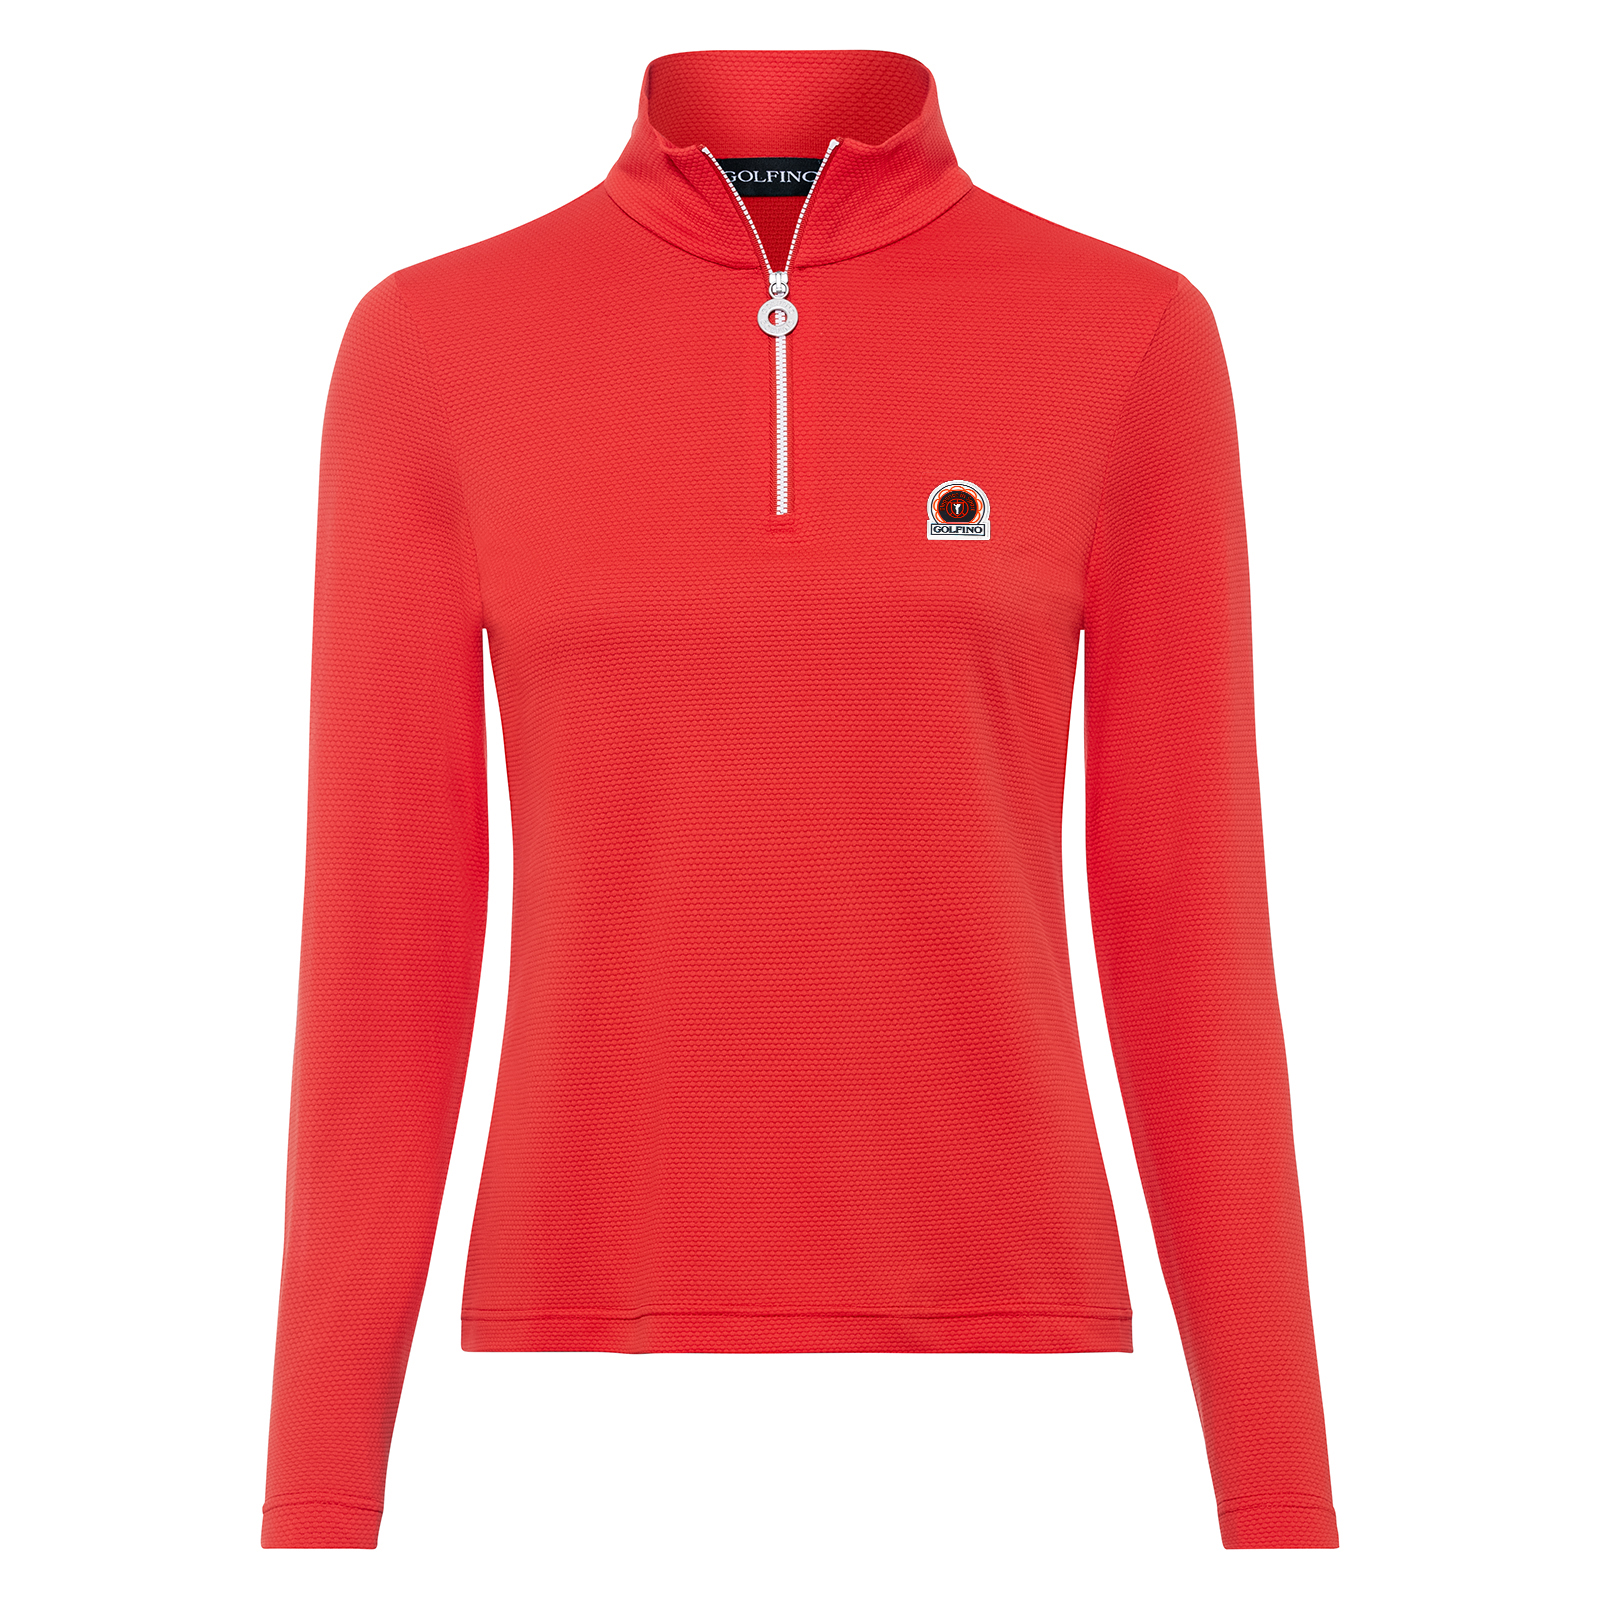 Ladies' long-sleeved stretch bubble jacquard golf shirt with innovative logo